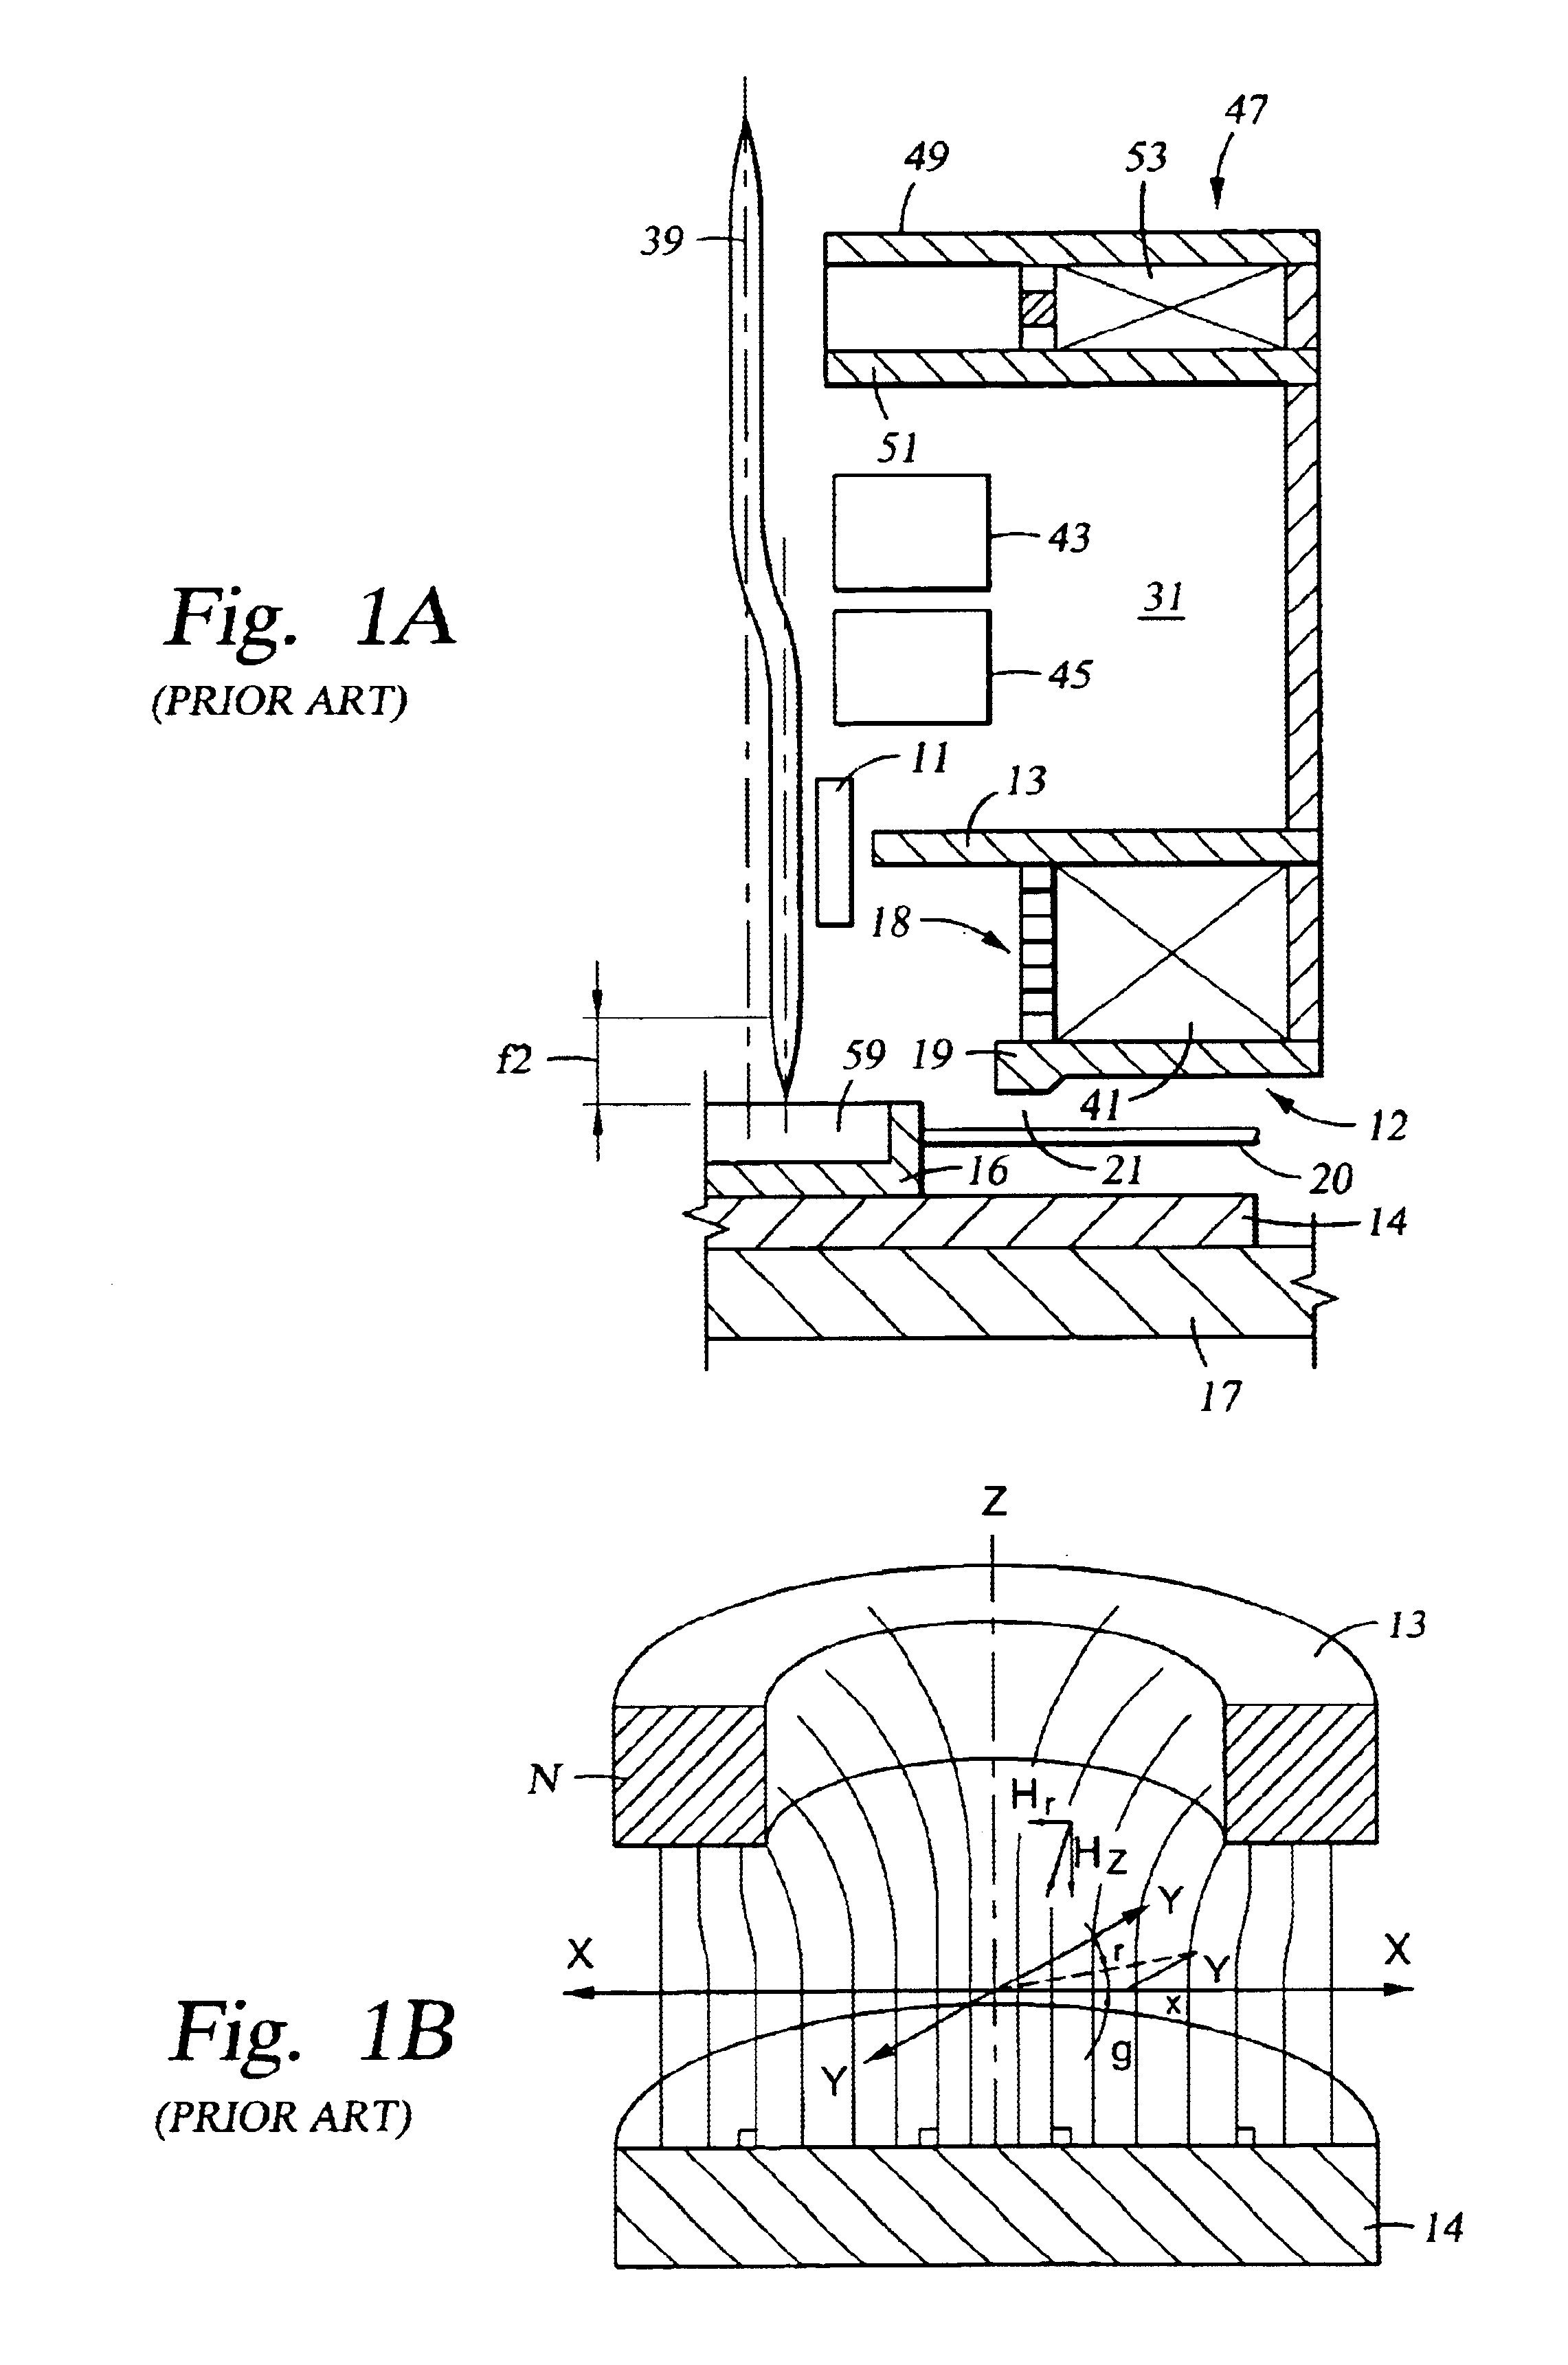 Immersion lens with magnetic shield for charged particle beam system